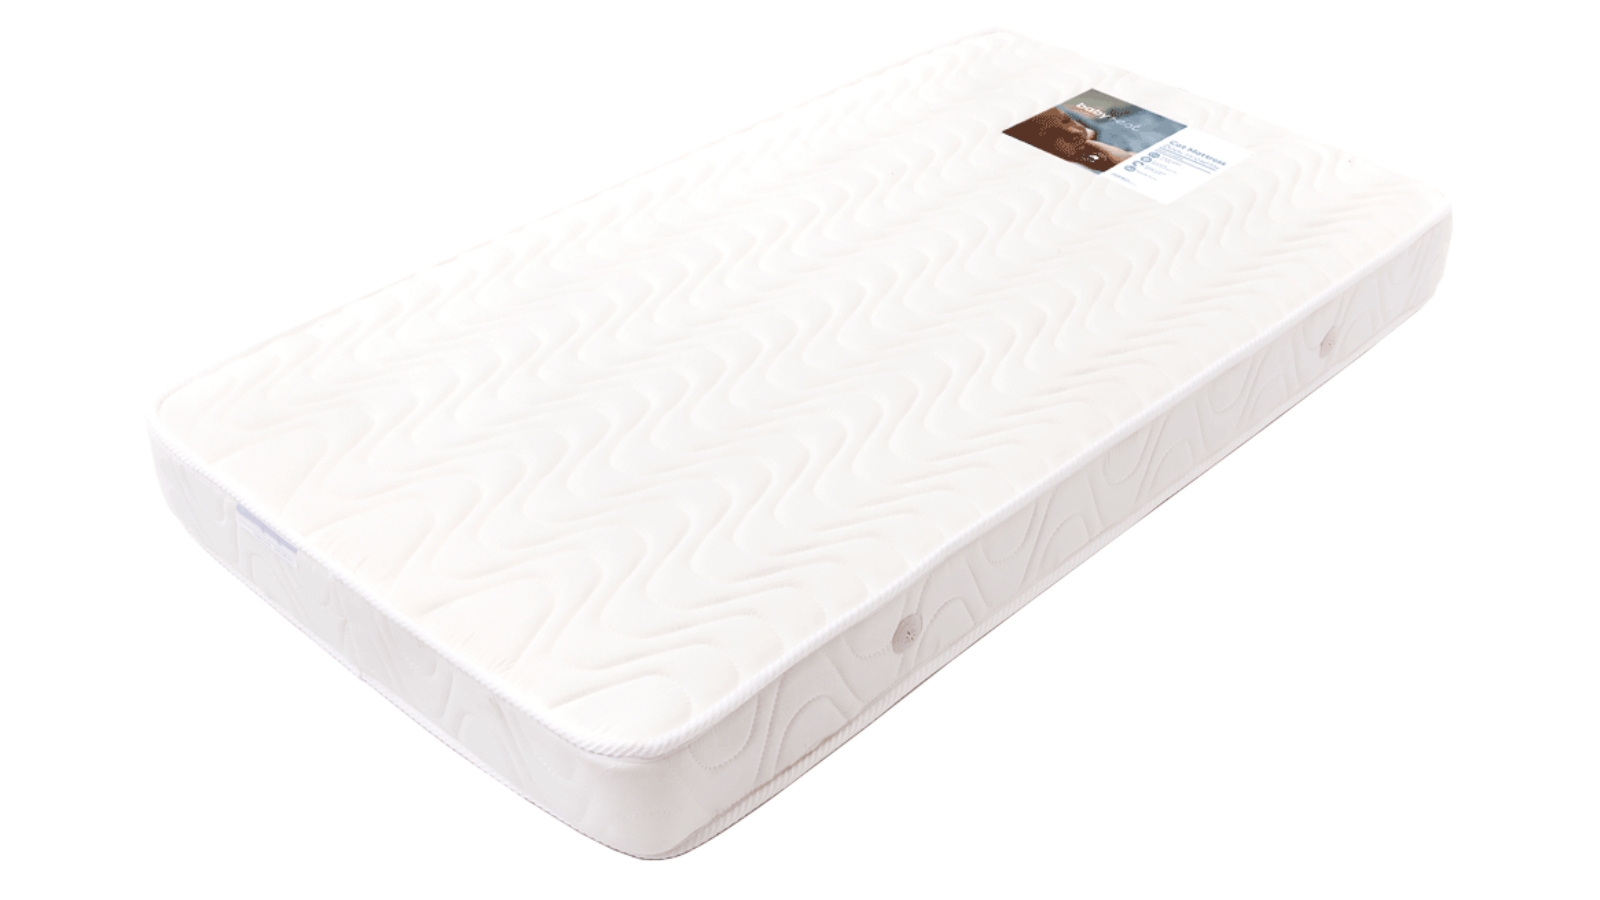 babyrest deluxe innerspring cot mattress double quilted review